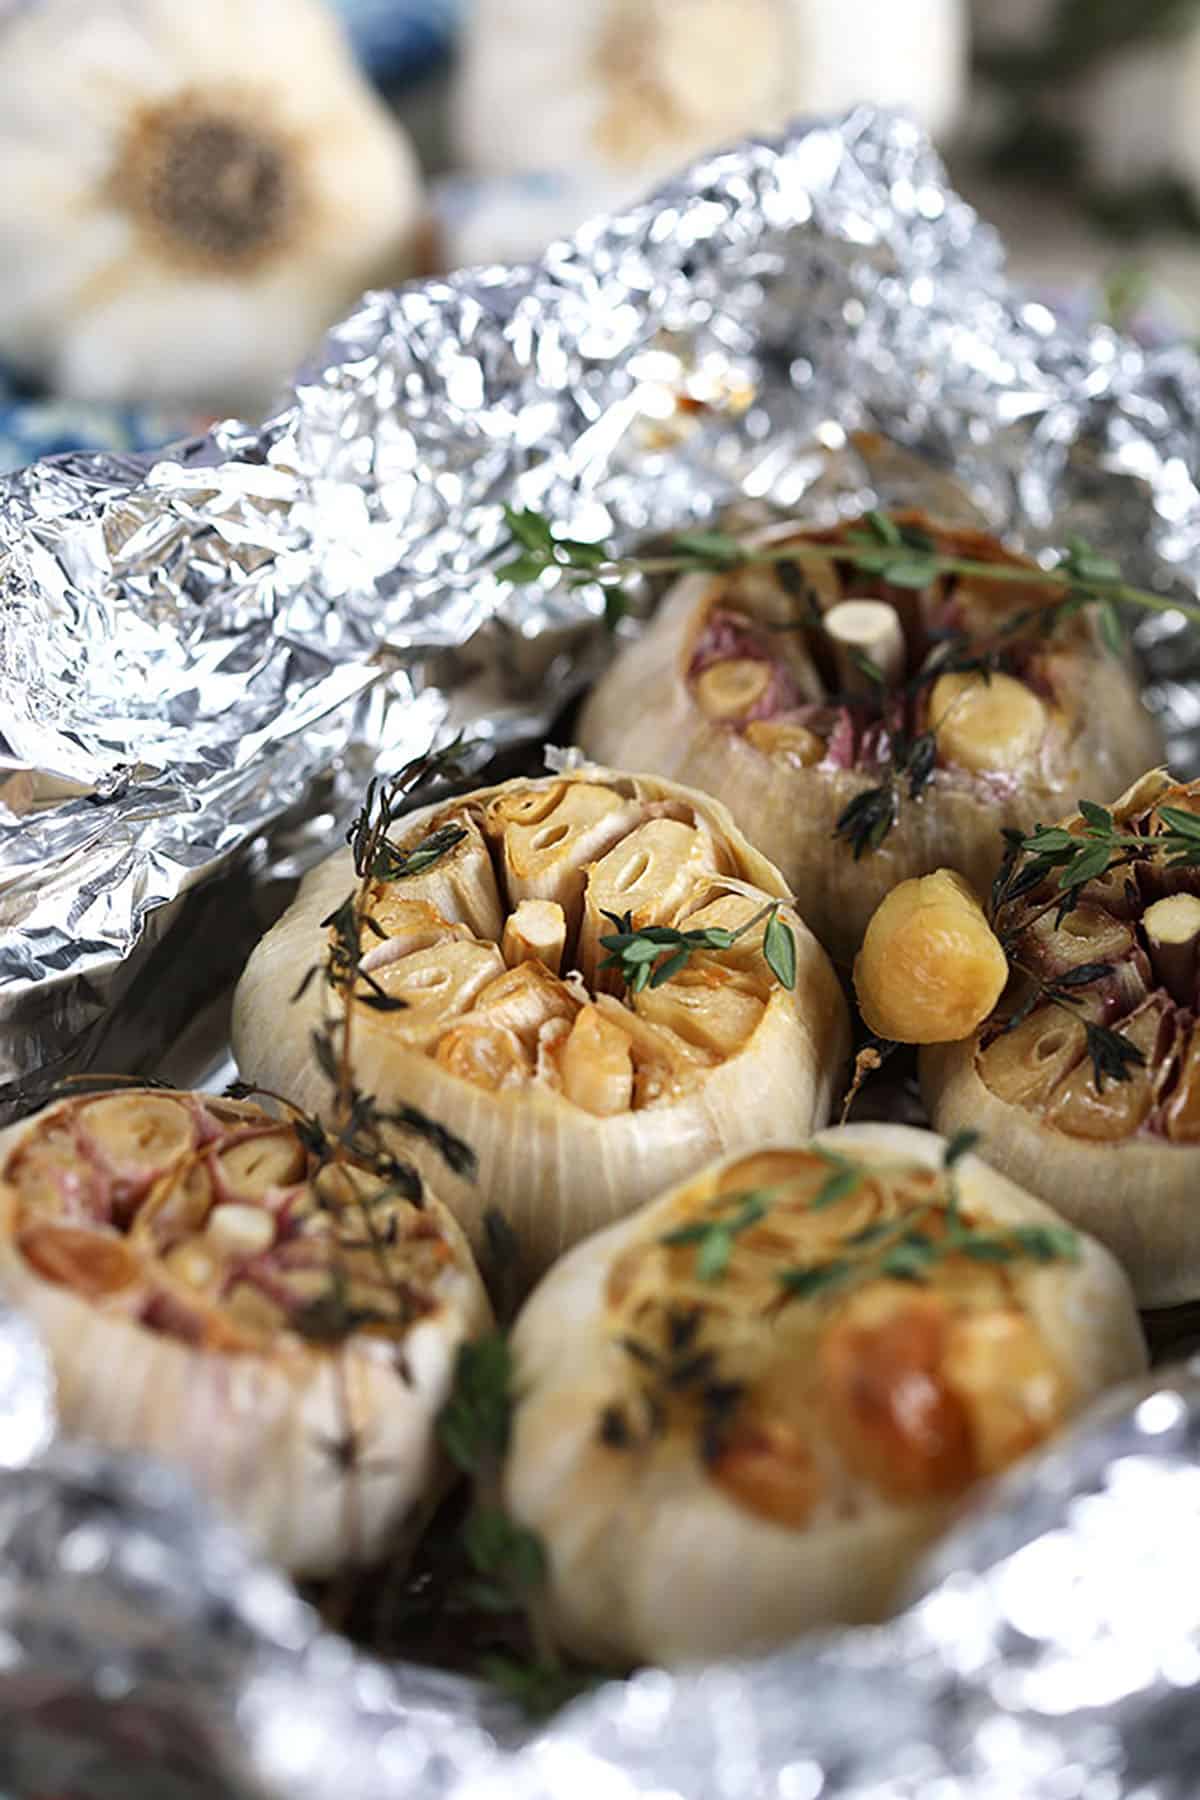 Roasted garlic in foil with thyme sprigs.